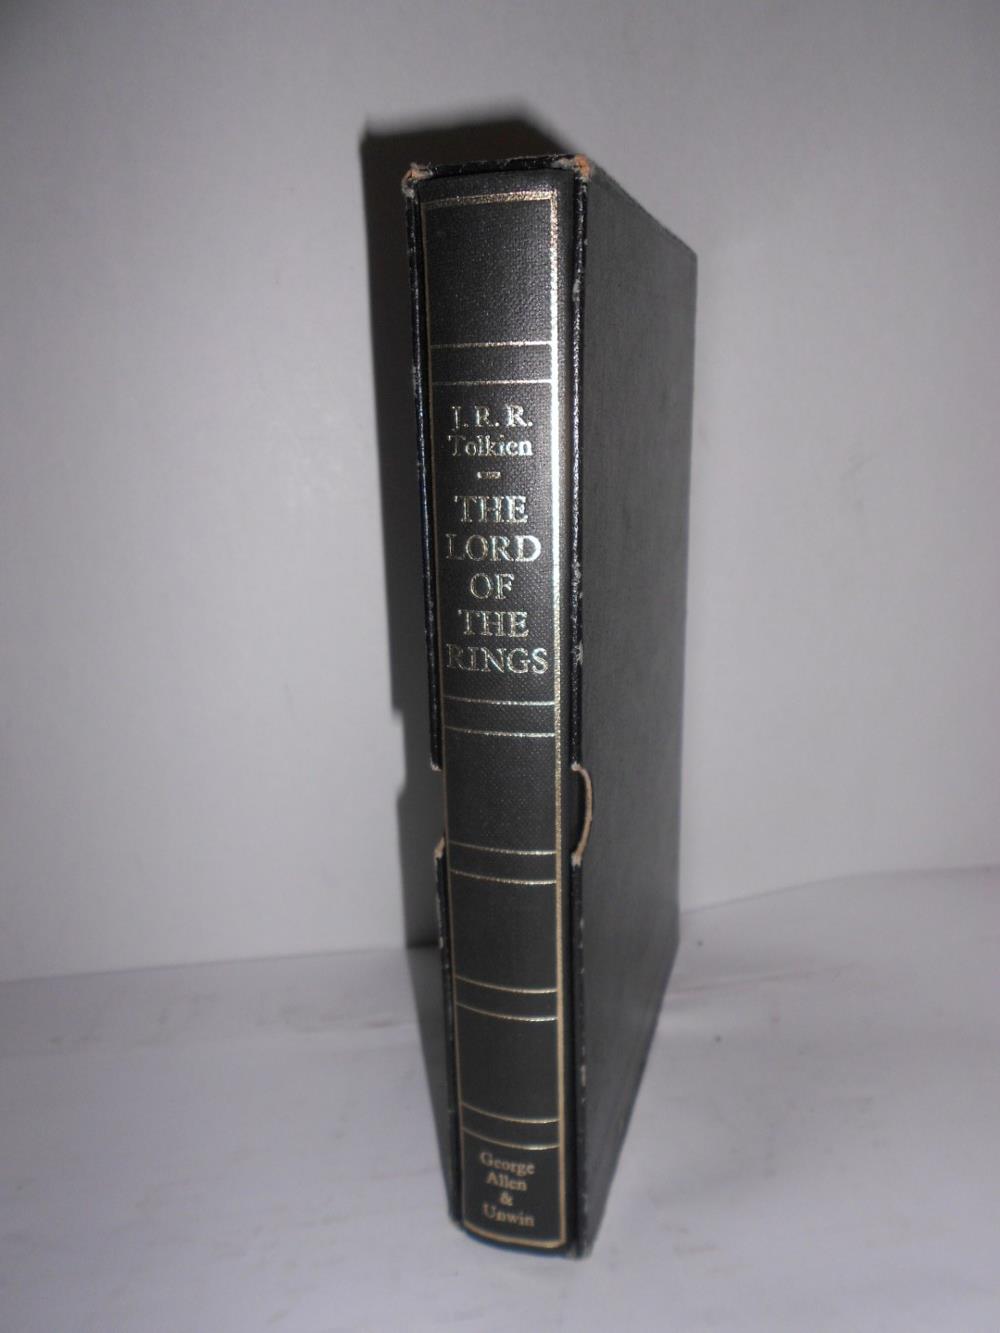 TOLKIEN (J.R.R.) The Lord of the Rings, 1969, 8vo, first single volume India paper edition,